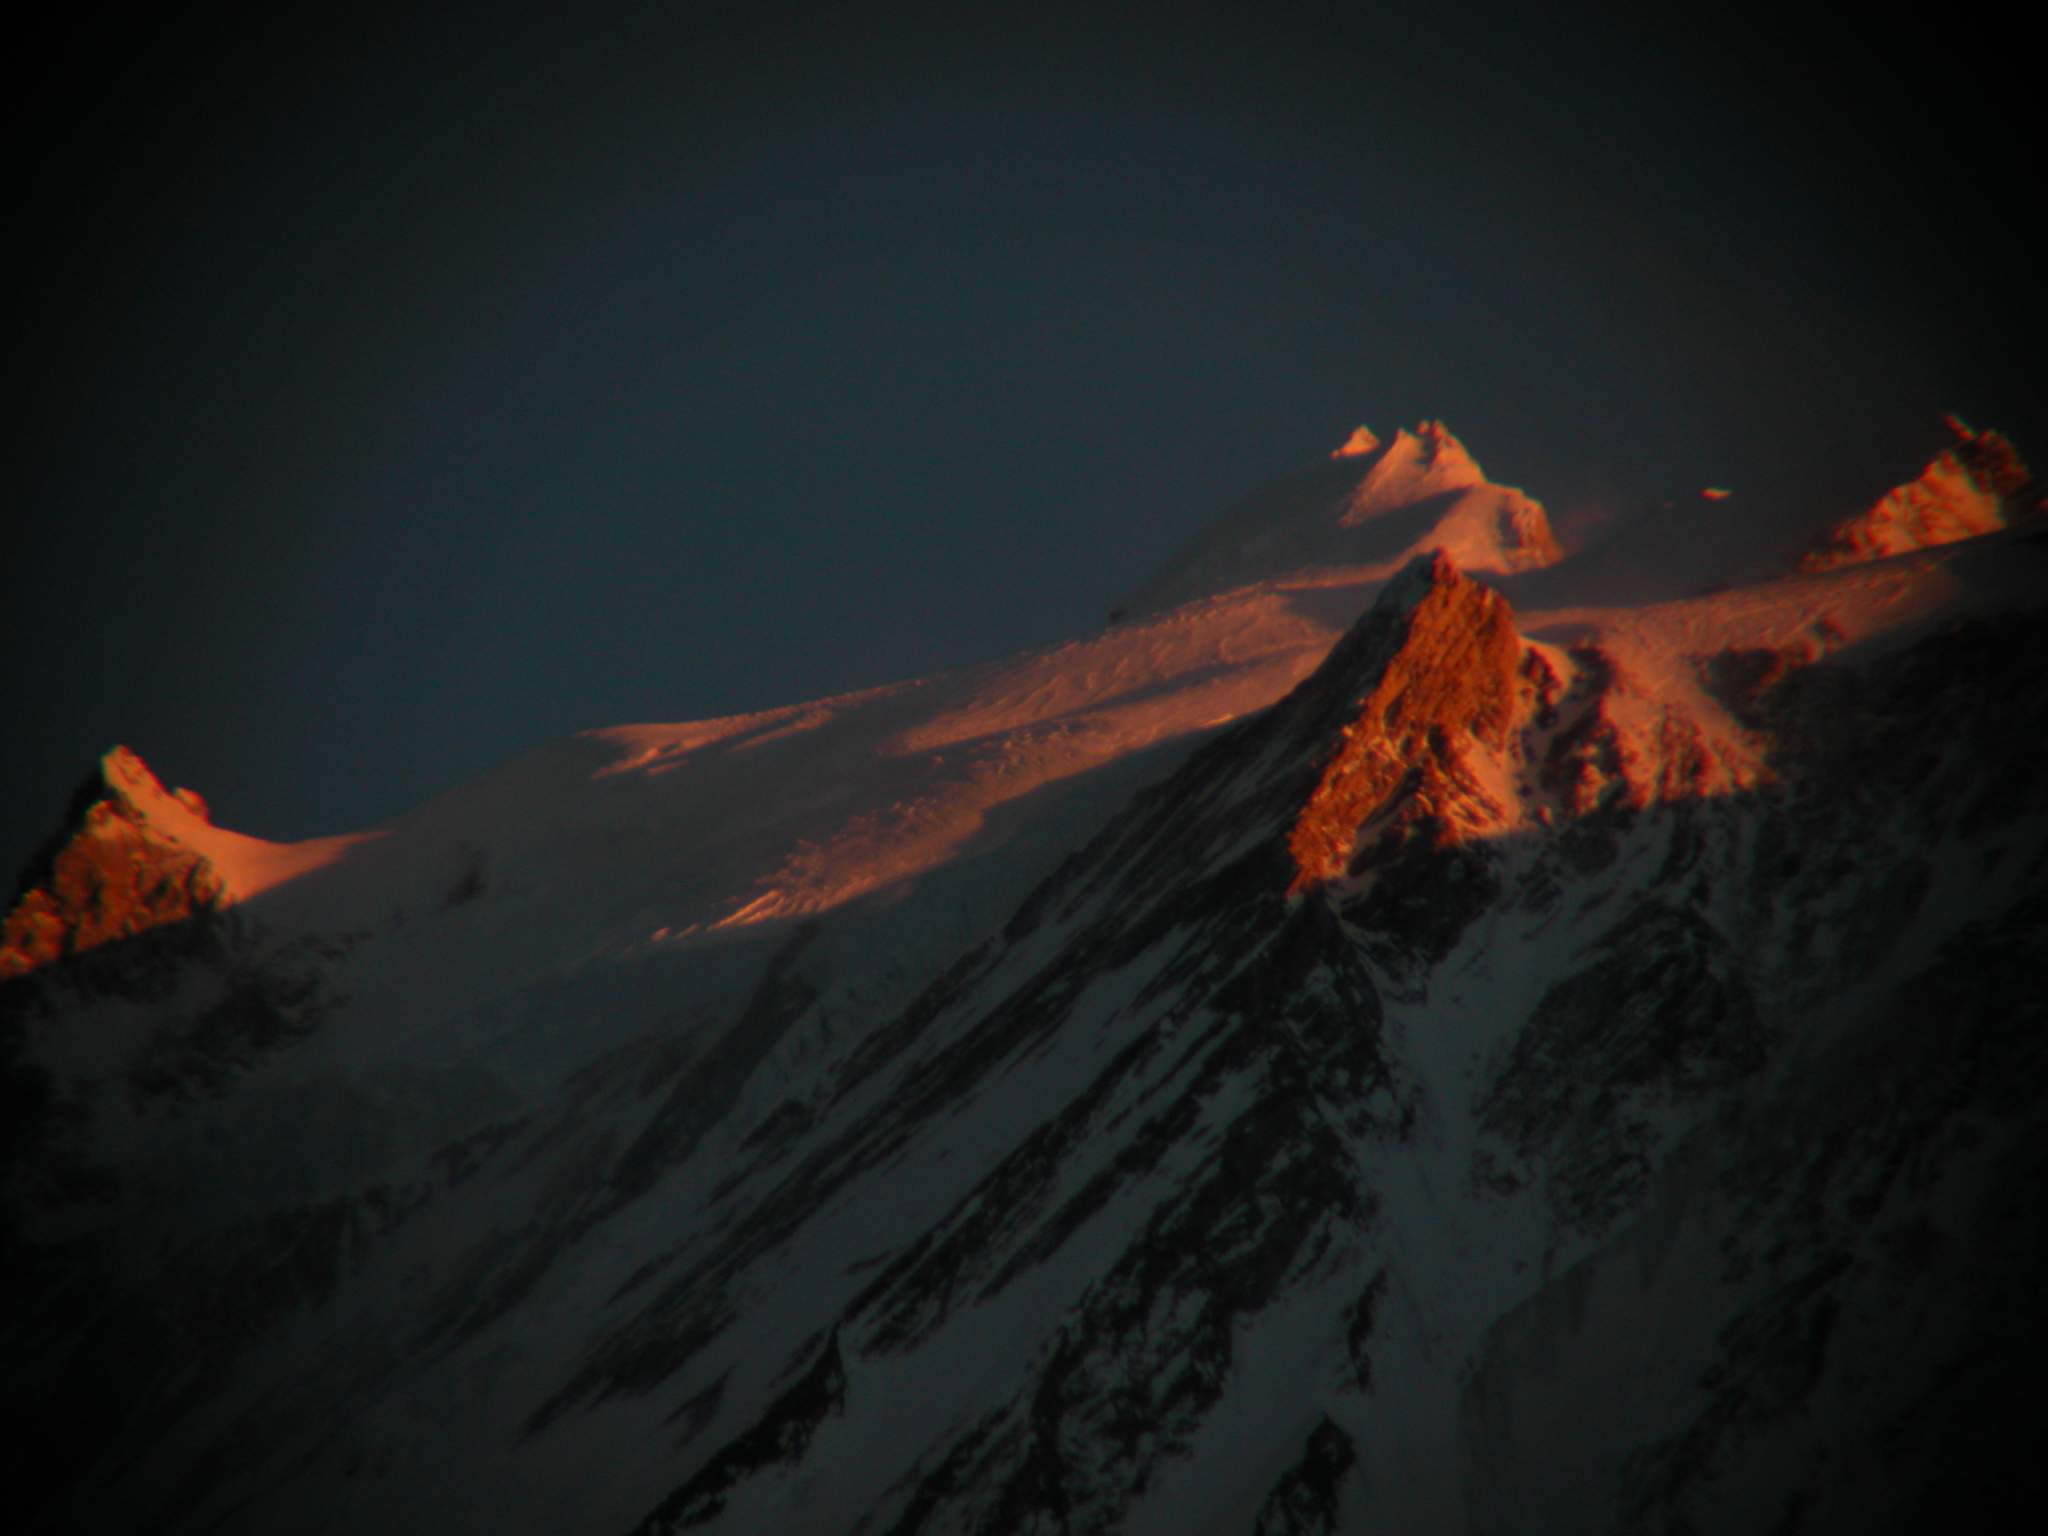 Manaslu 09 11 Manaslu Summit Plateau Close Up At Sunset From Bimtang Heres another extremely close up view from Bimtang at sunset of the summit plateau of Manaslu with the East Pinnacle (7992m) on the left and the summit to the right.